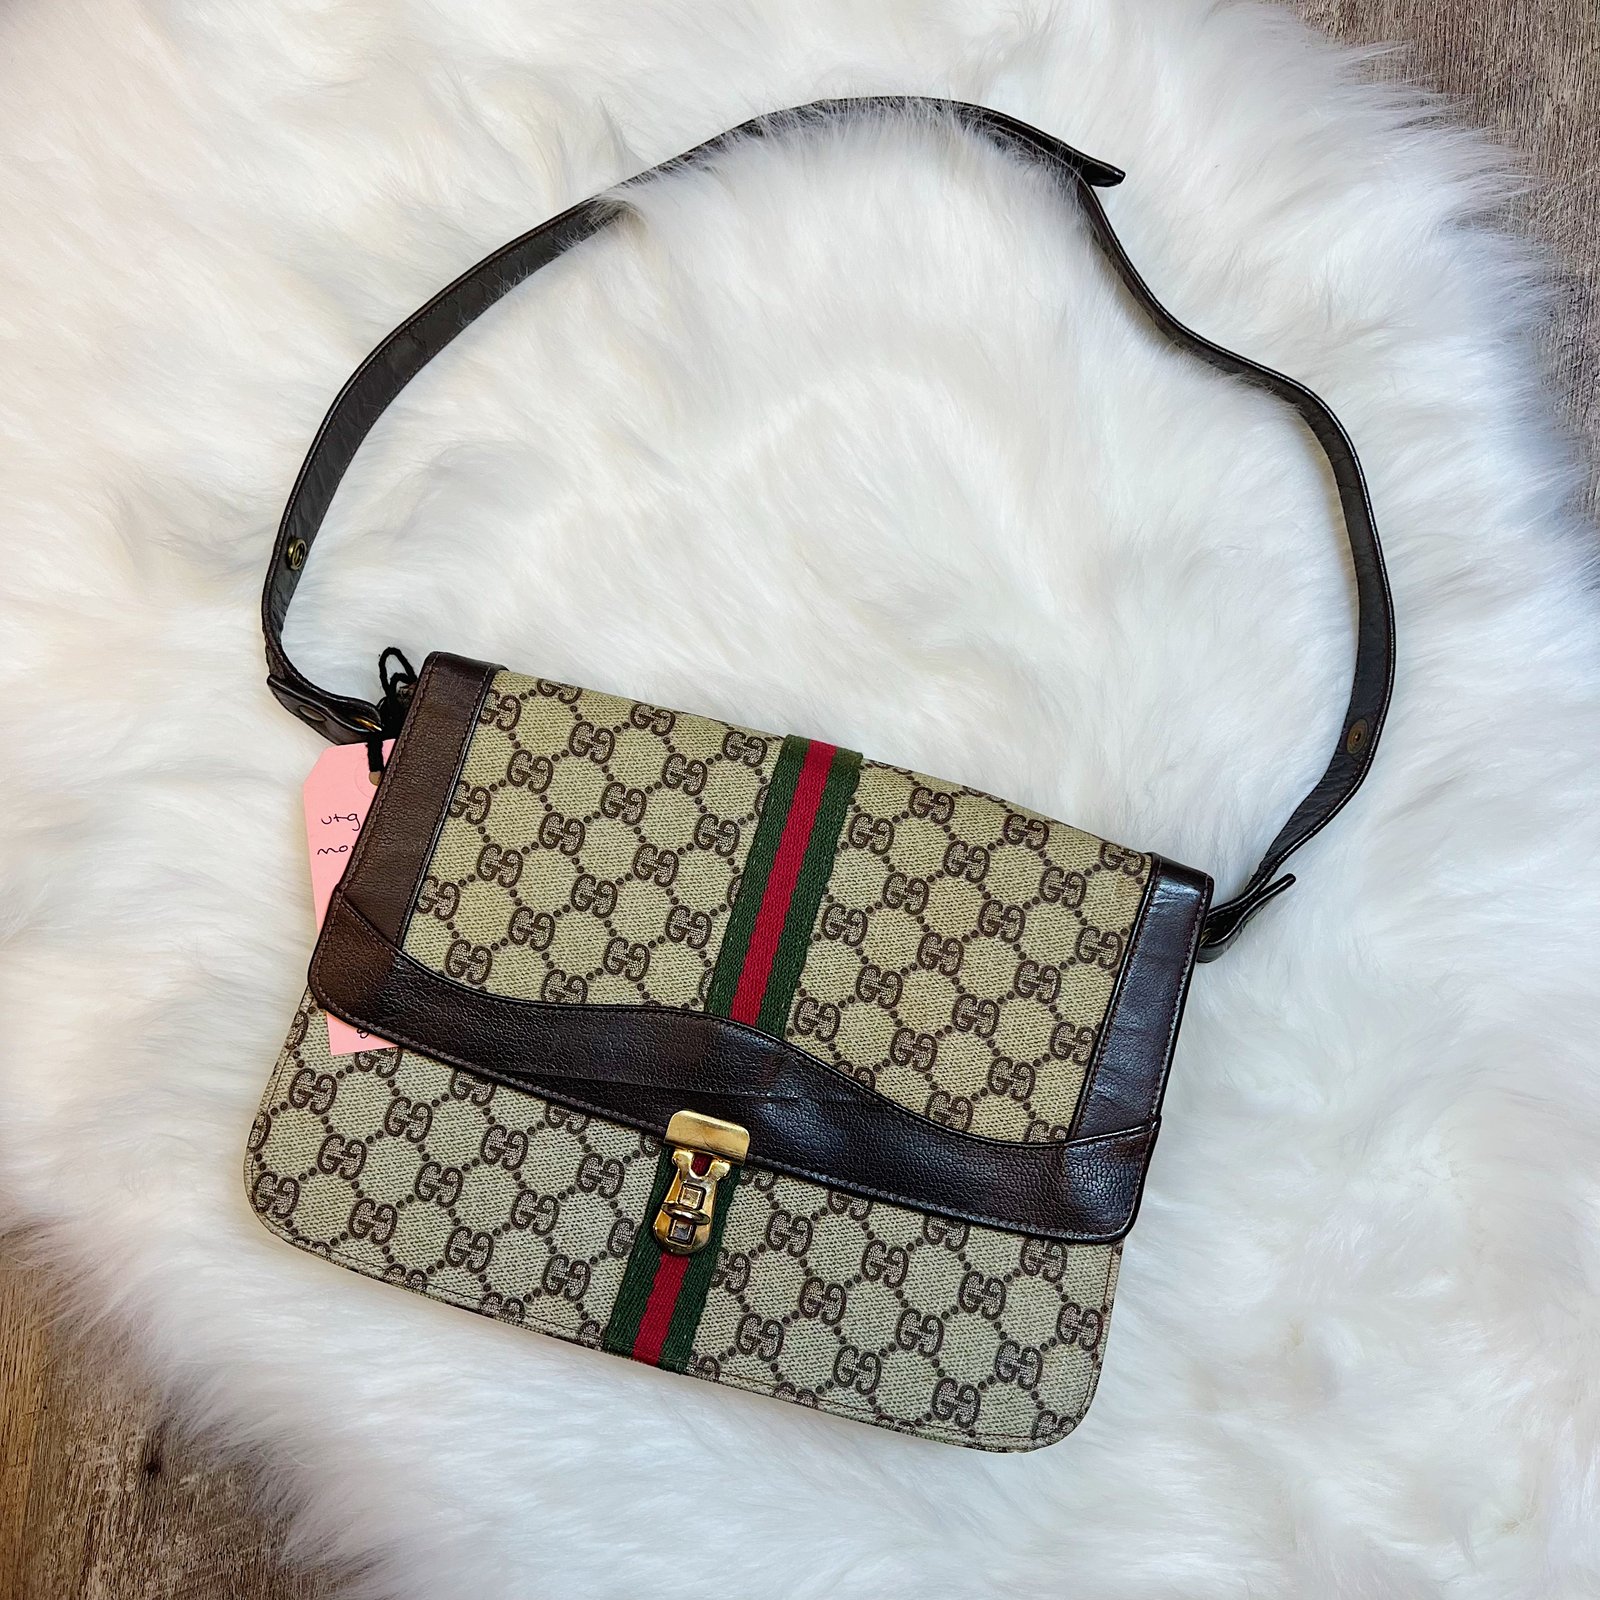 Gucci Women's Bag | Sale Up to 50% Off